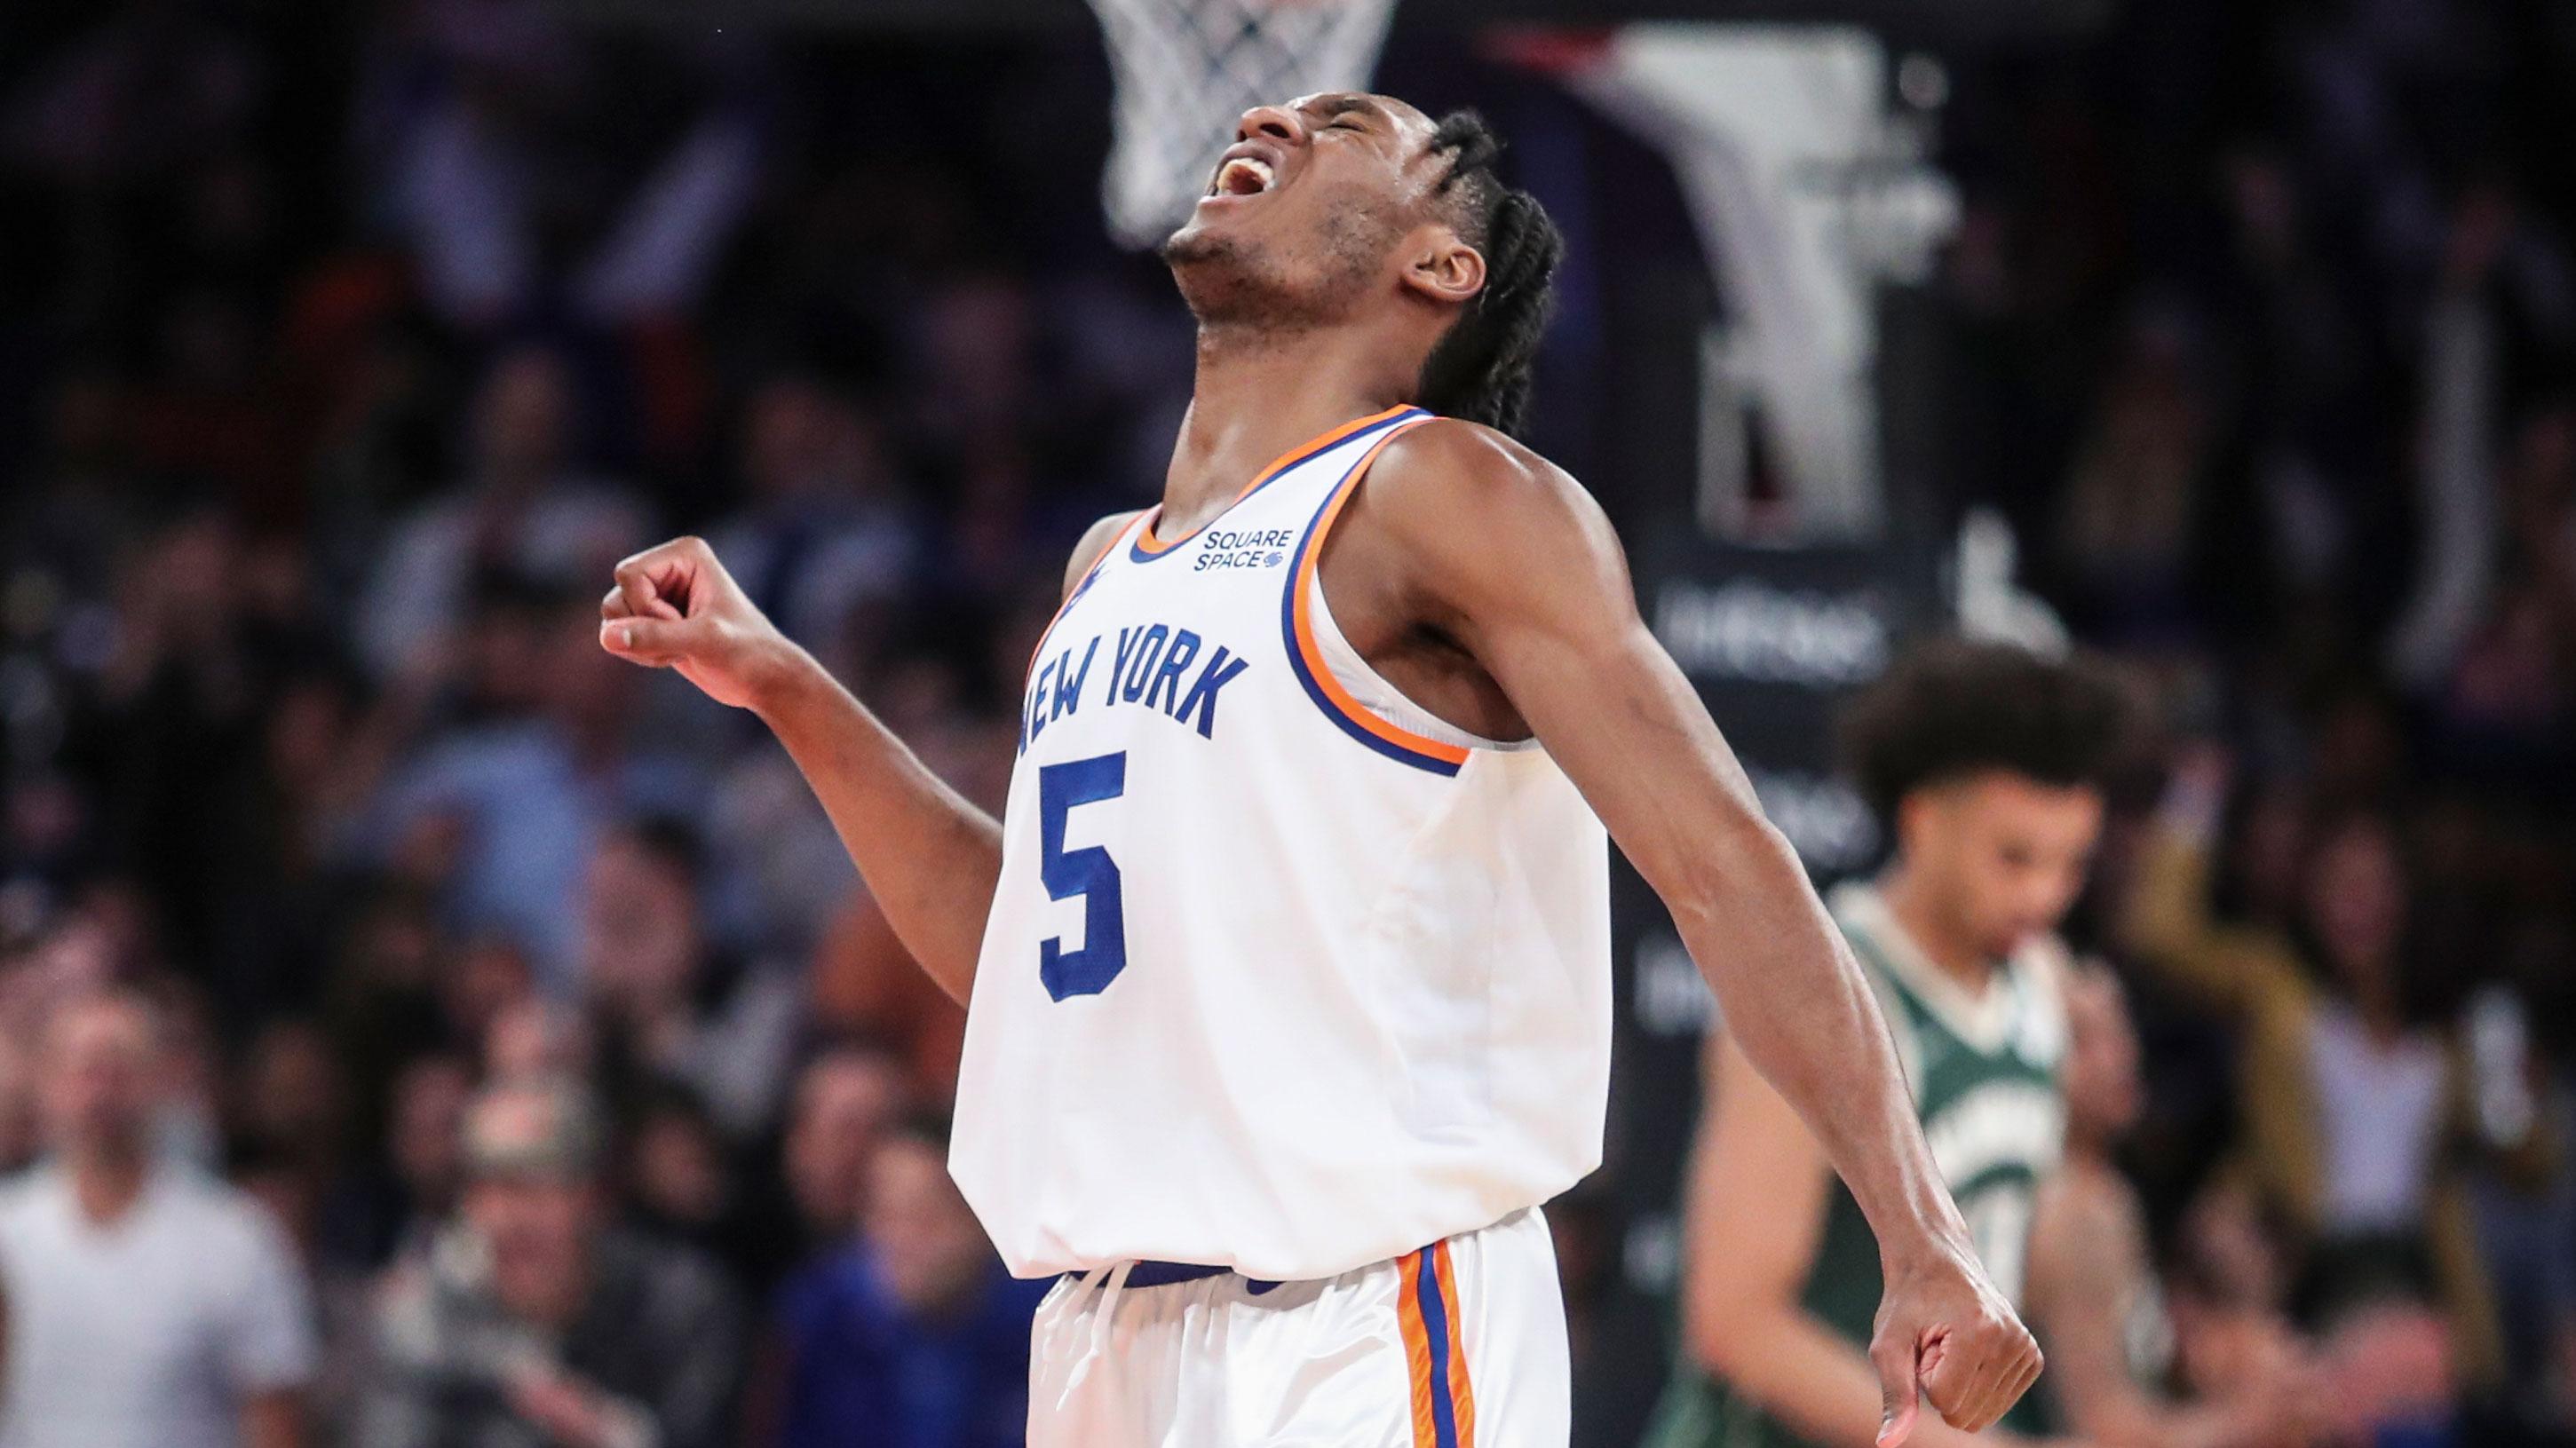 Nov 10, 2021; New York, New York, USA; New York Knicks guard Immanuel Quickley (5) celebrates during a timeout in the second quarter against the Milwaukee Bucks at Madison Square Garden. / Wendell Cruz-USA TODAY Sports